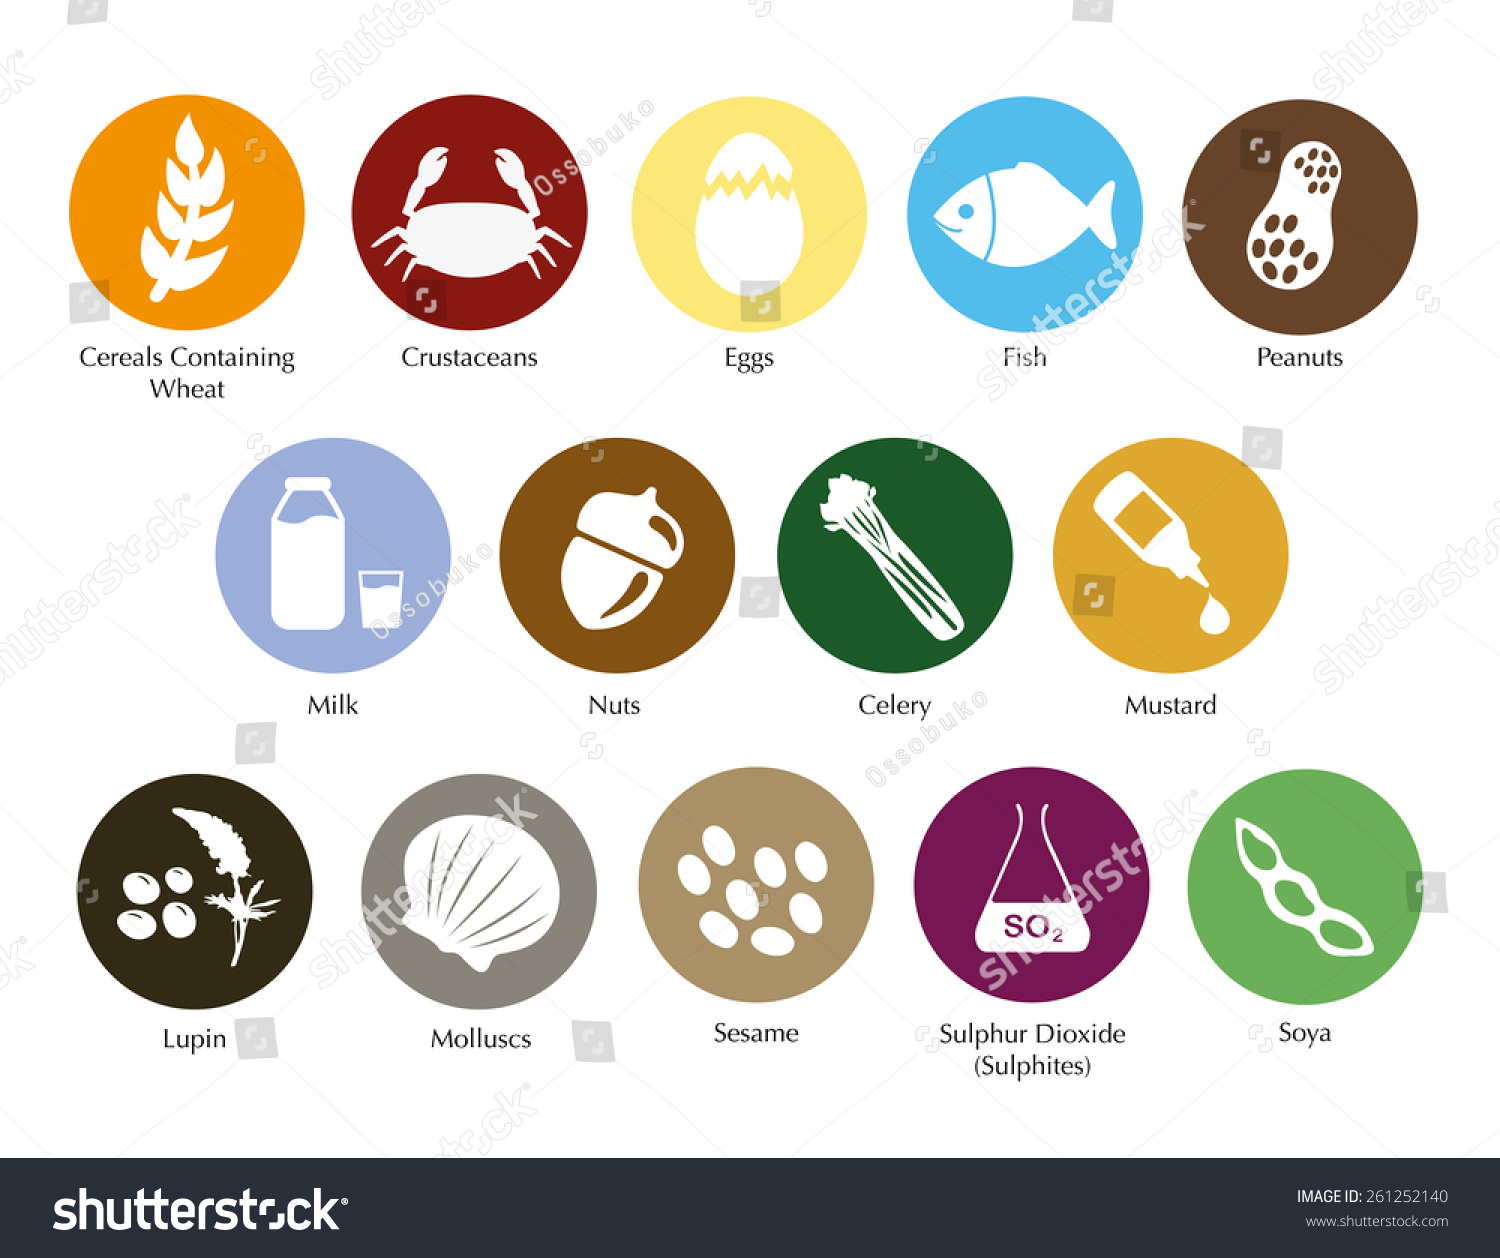 Where can you find stock photos of symbols?